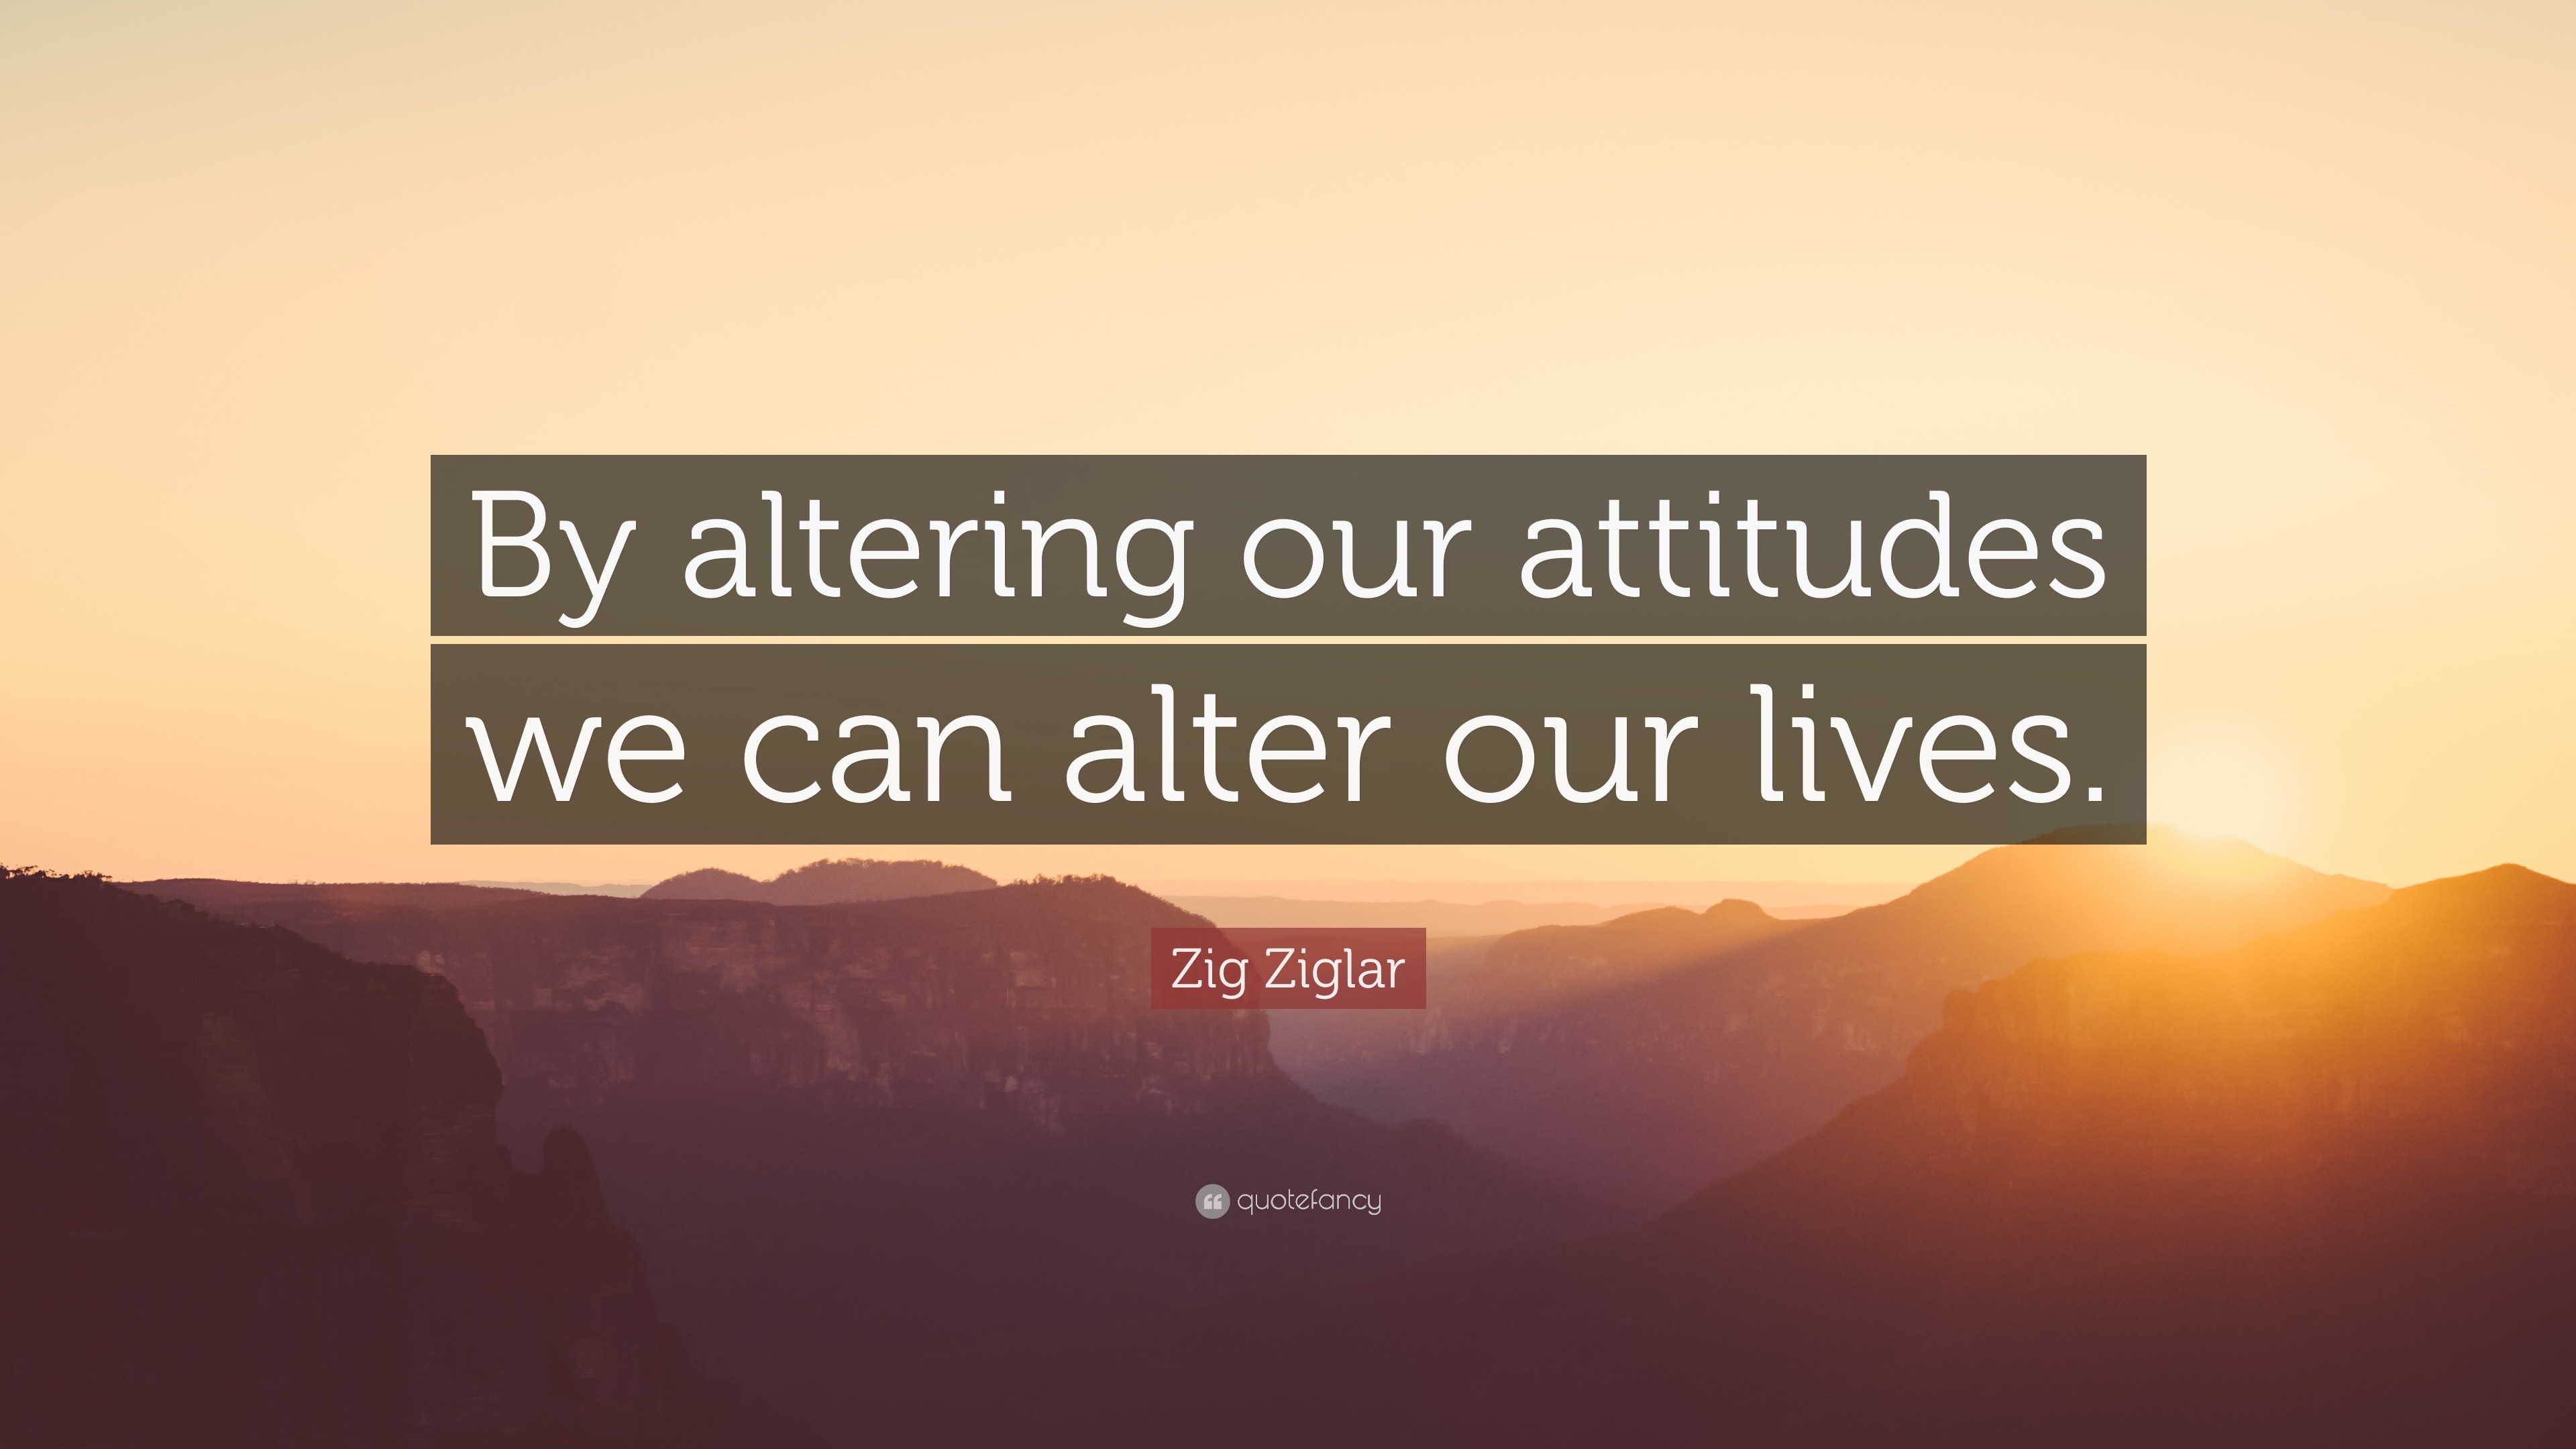 Zig Ziglar Quote: “By altering our attitudes we can alter our lives.”